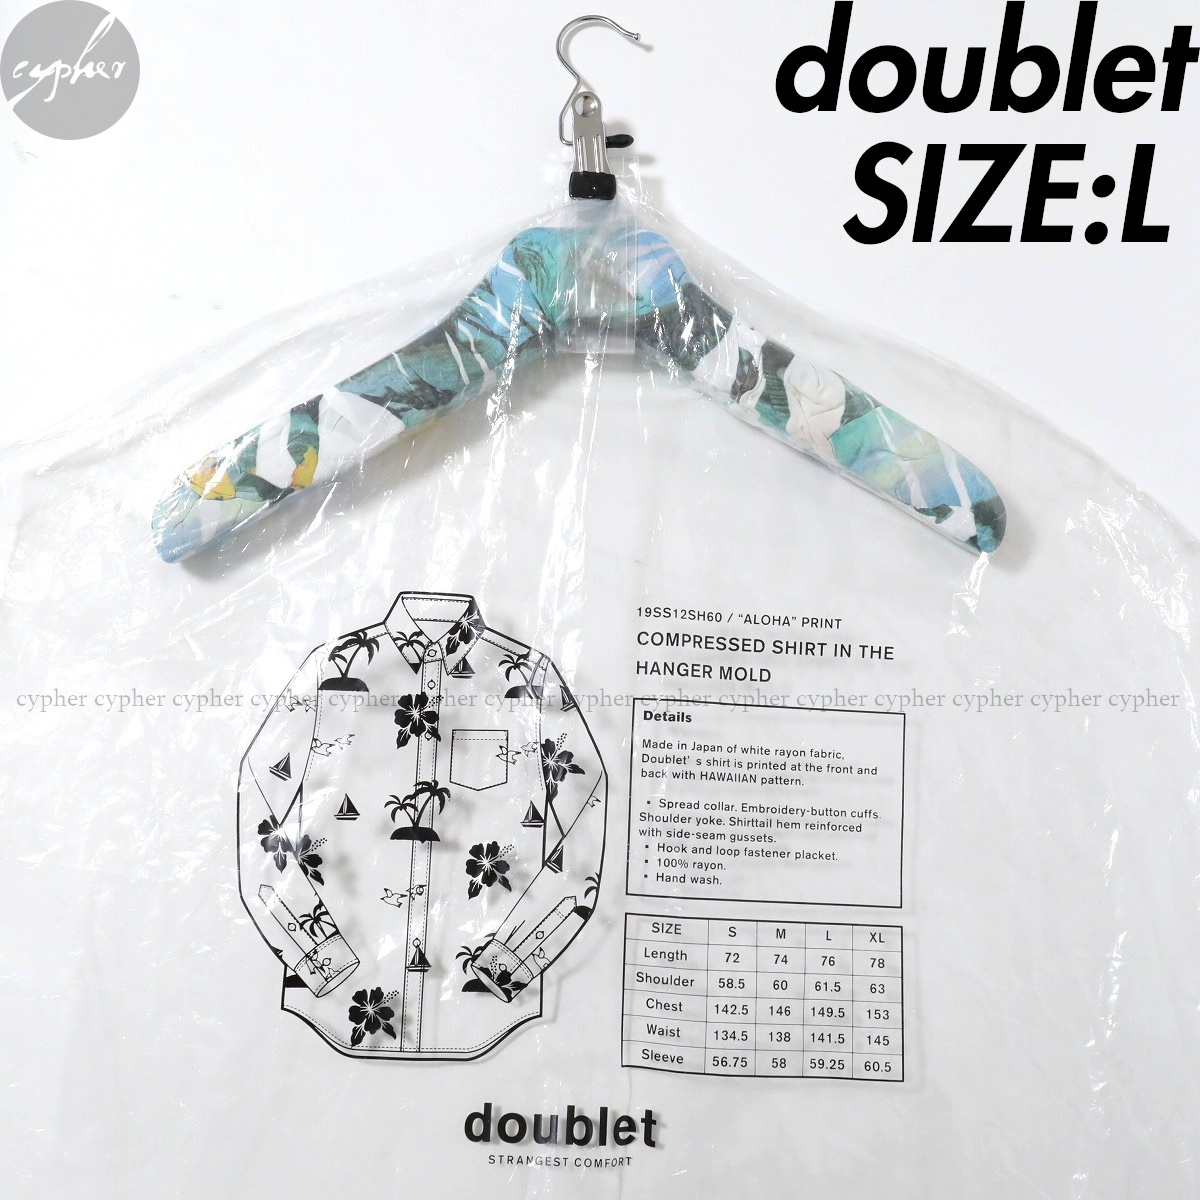 L 新品 doublet COMPRESSED SHIRT IN THE HANGER MOLD ダブレット アロハ プリント シャツ ハワイアン 総柄 コンプレスド ハンガー